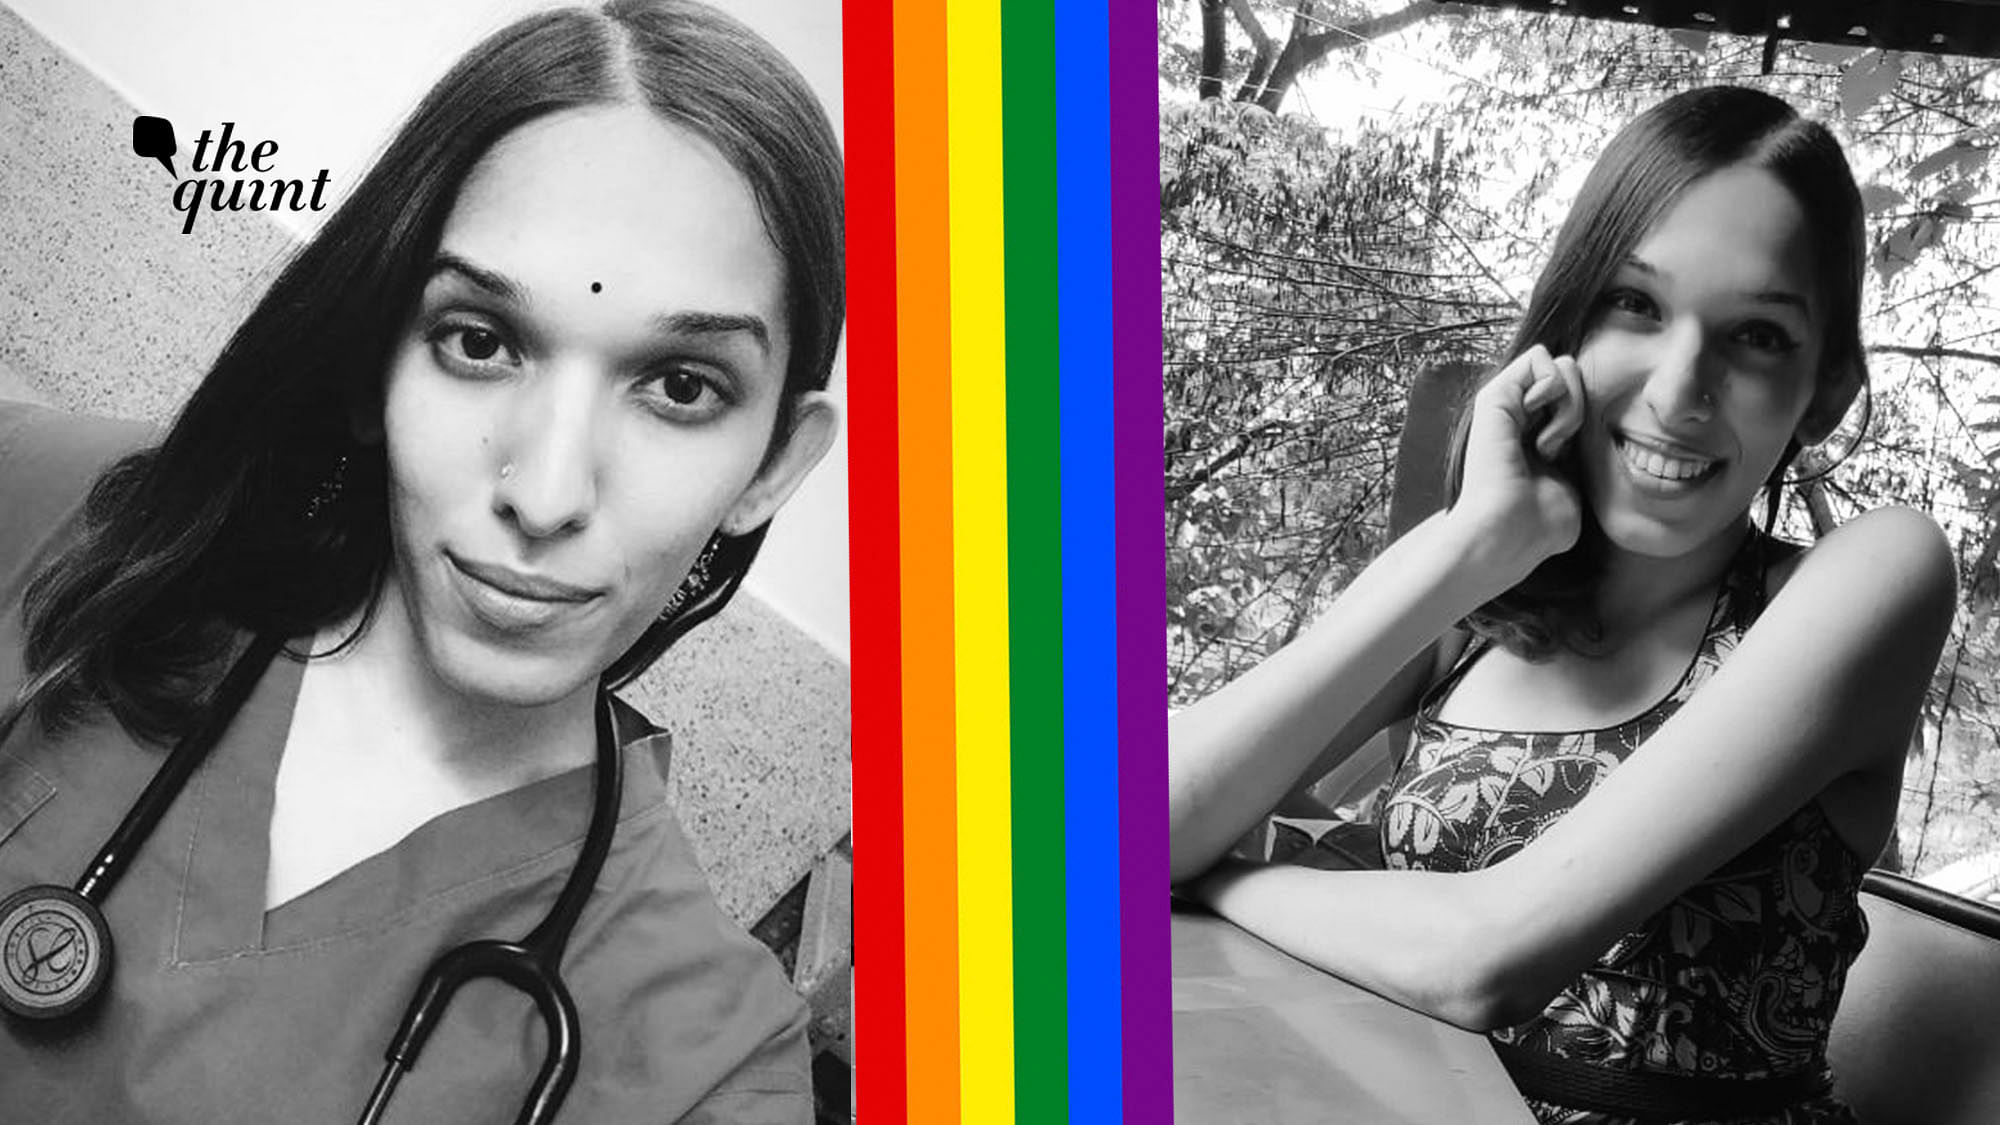 22-year-old Trinetra Haldar Gummaraju is a medical student, activist, vlogger and an out-and- proud transwoman.